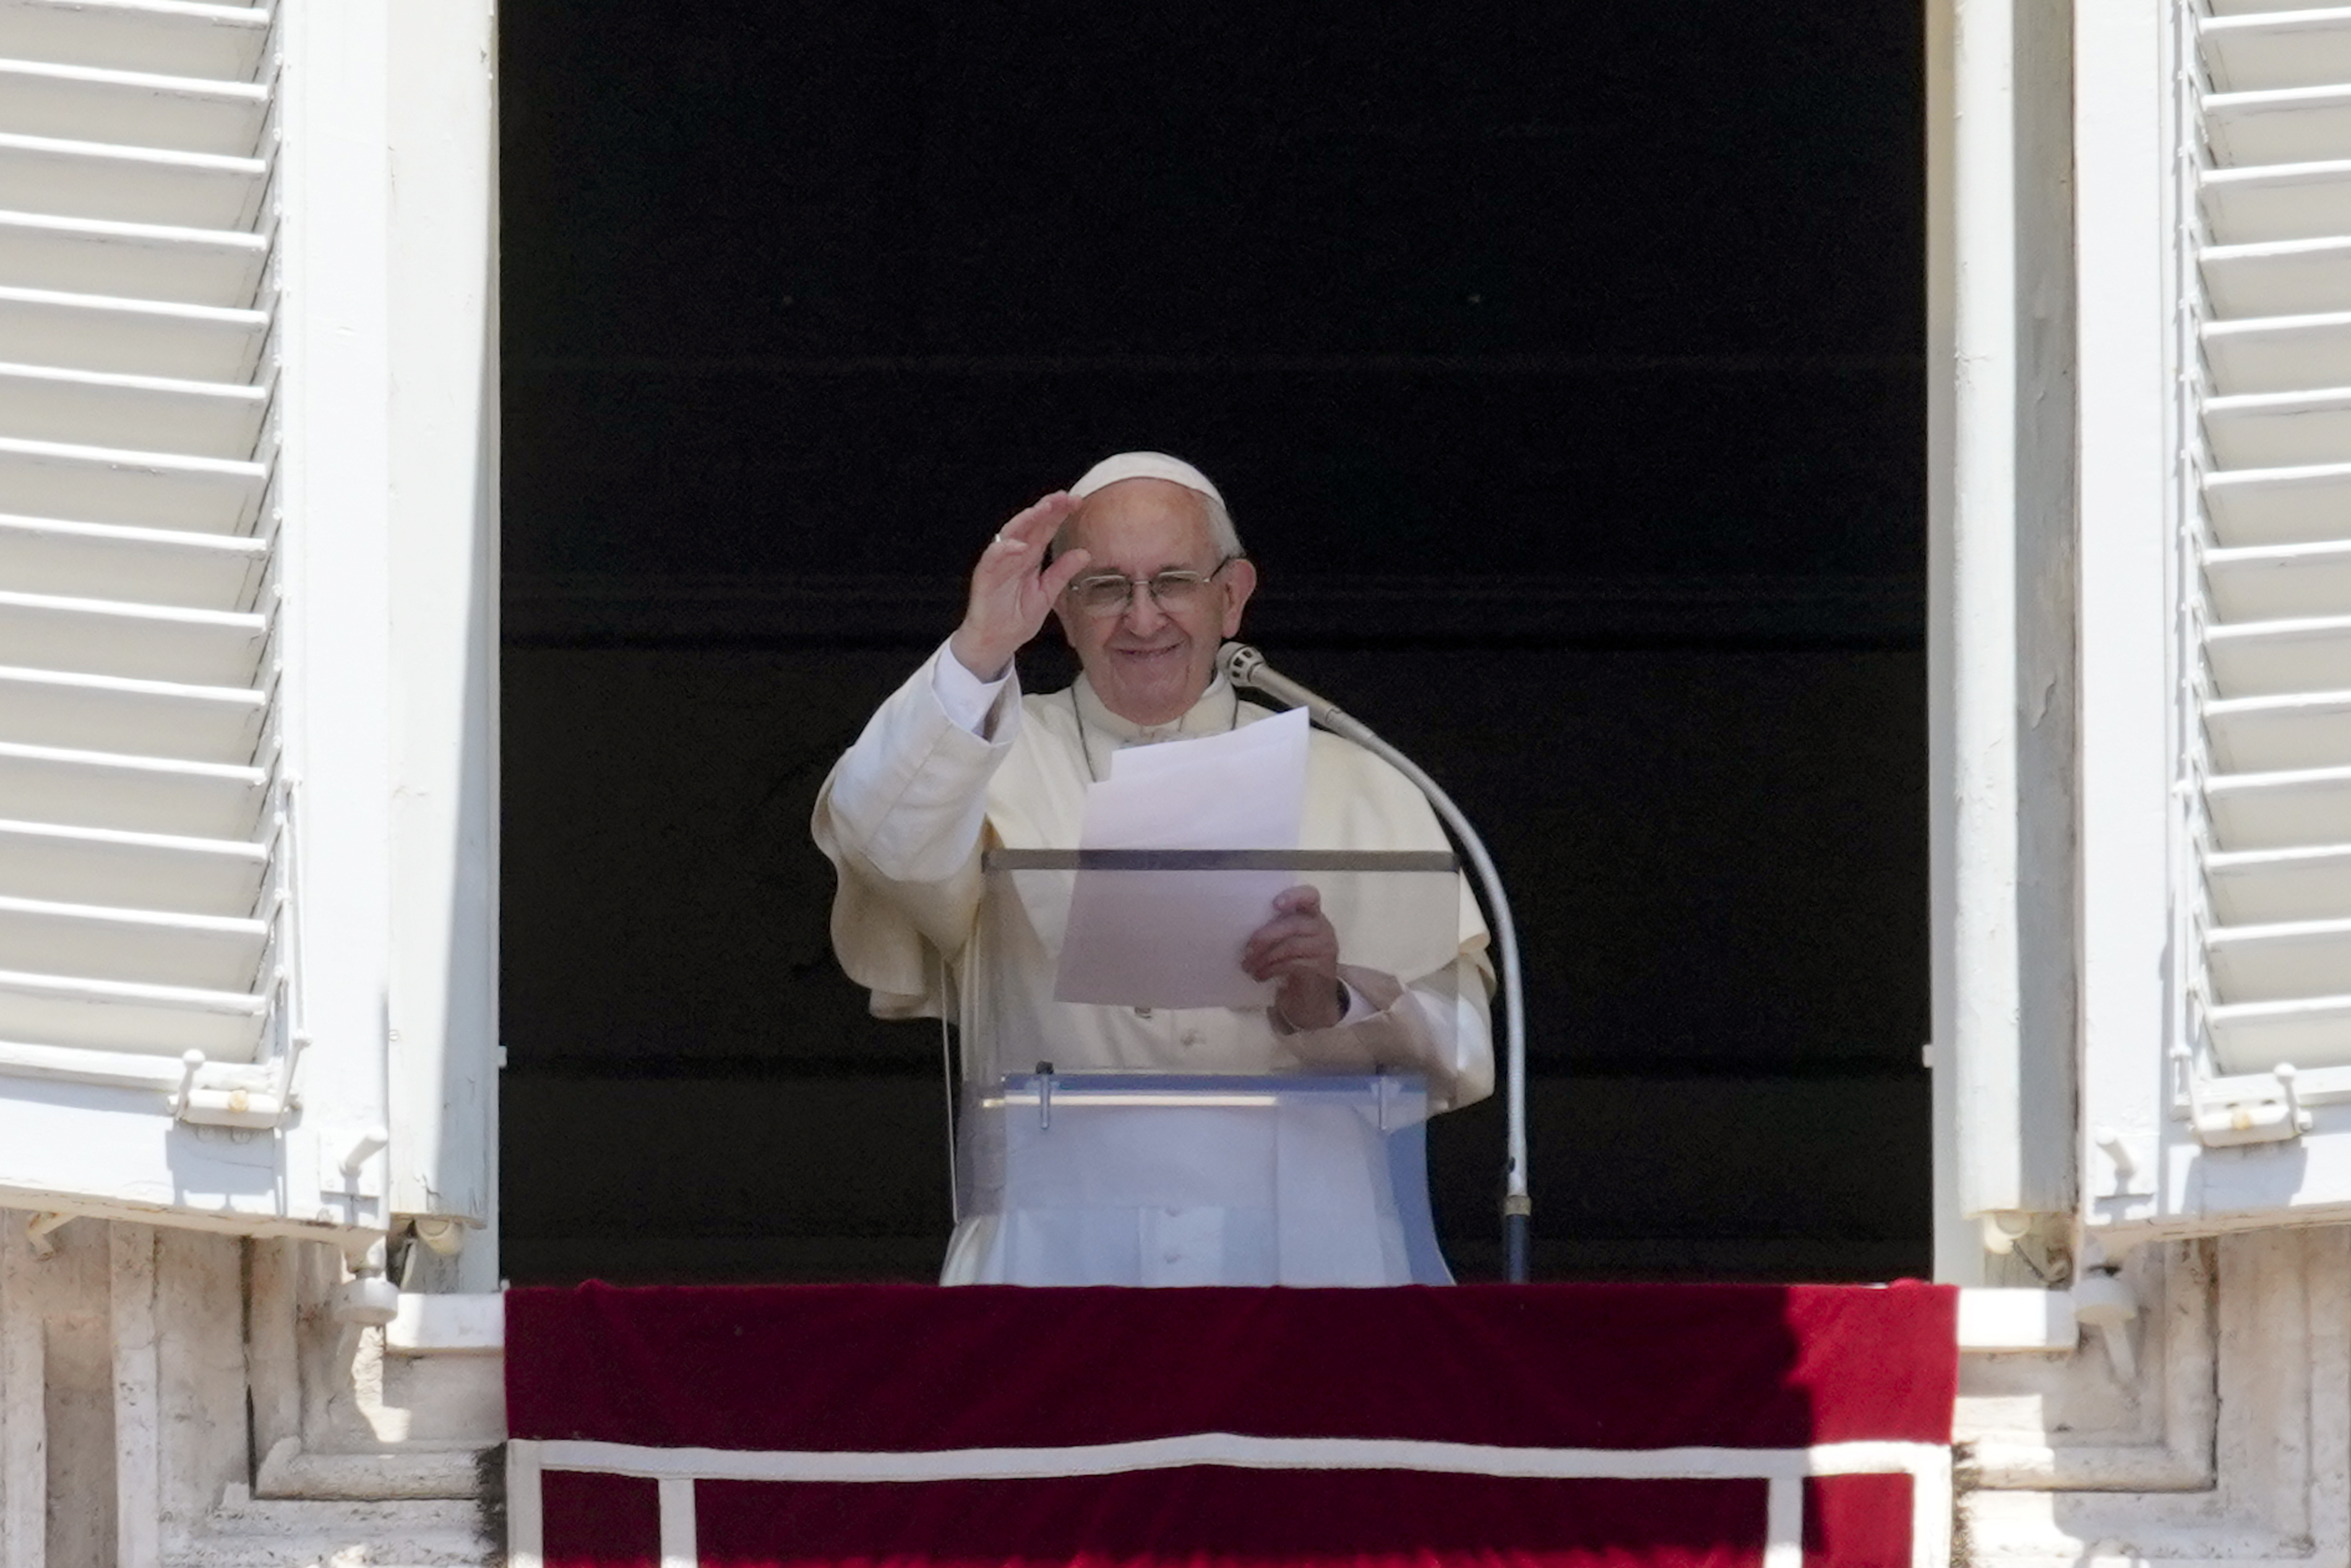 Pope Francis waves to the crowd as he recites the Angelus noon prayer from the window of his studio overlooking St. Peter's Square, at the Vatican, Sunday, June 10, 2018. (AP Photo/Andrew Medichini)